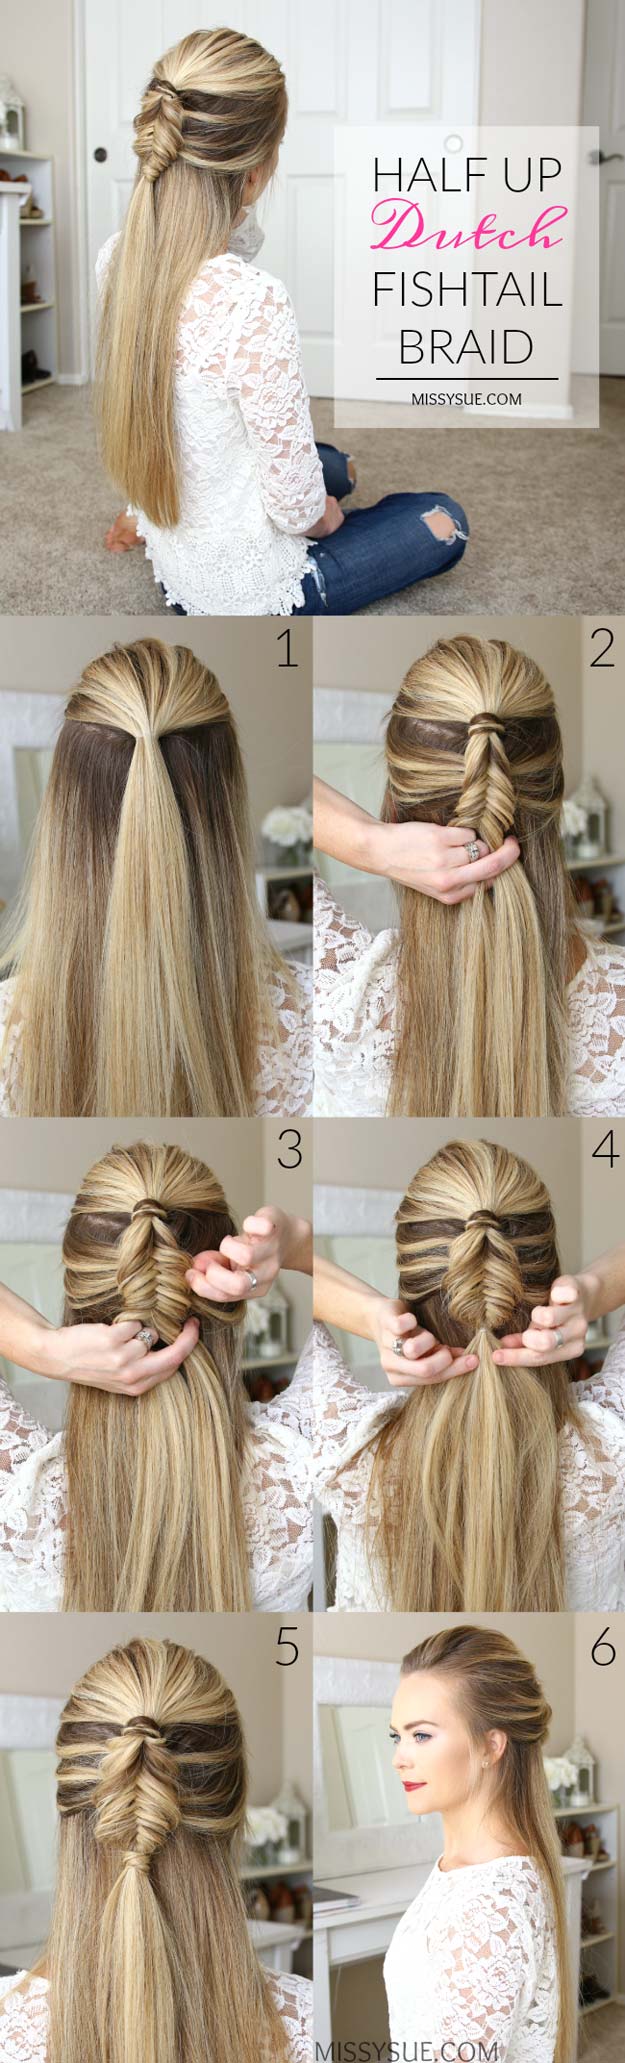 Best Hair Braiding Tutorials - Half Up Dutch Fishtail Braid - Easy Step by Step Tutorials for Braids - How To Braid Fishtail, French Braids, Flower Crown, Side Braids, Cornrows, Updos - Cool Braided Hairstyles for Girls, Teens and Women - School, Day and Evening, Boho, Casual and Formal Looks #hairstyles #braiding #braidingtutorials #diyhair 